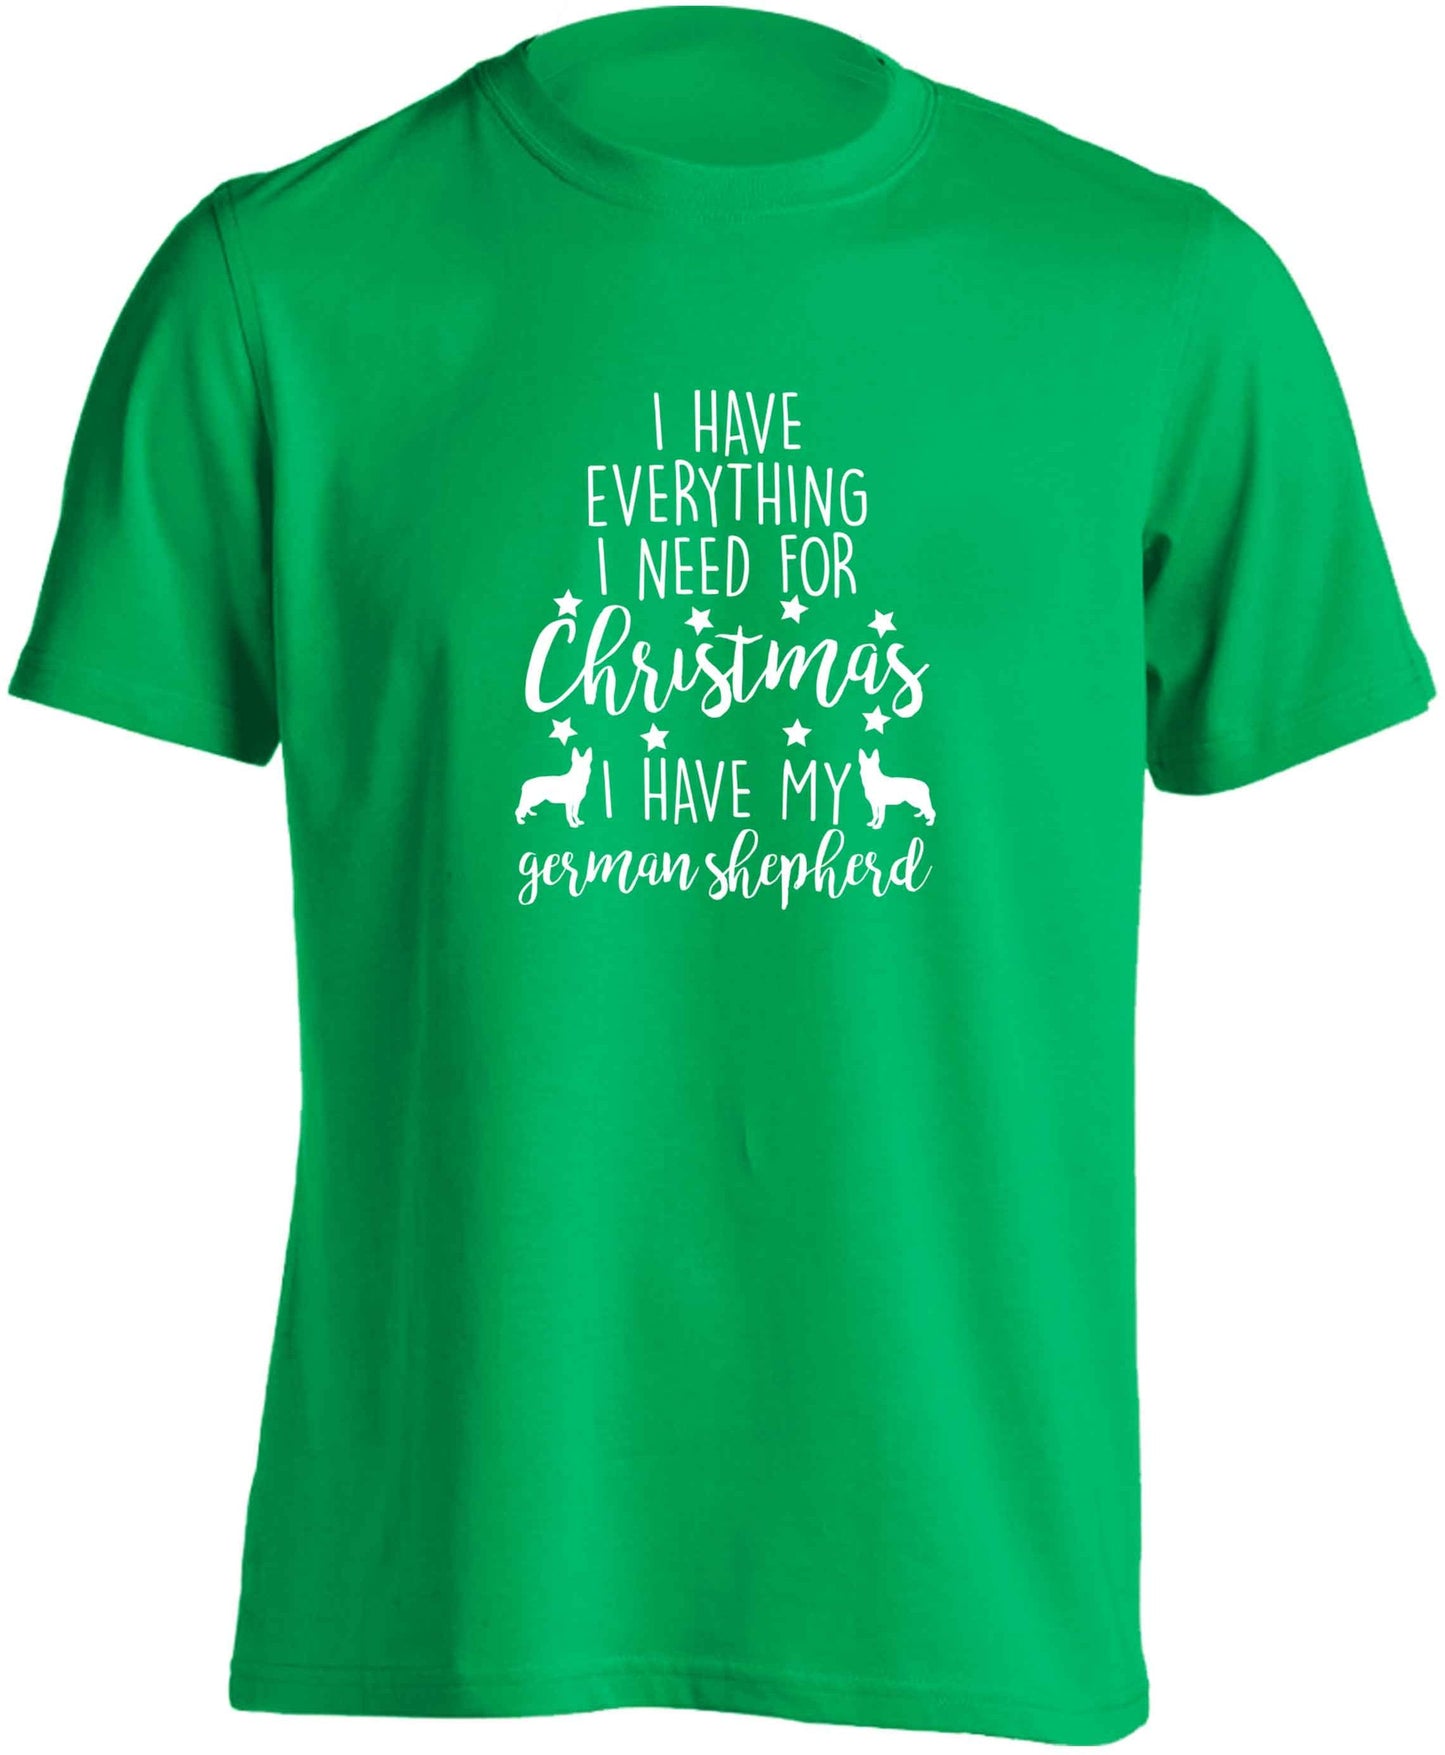 I have everything I need for Christmas I have my german shepherd adults unisex green Tshirt 2XL